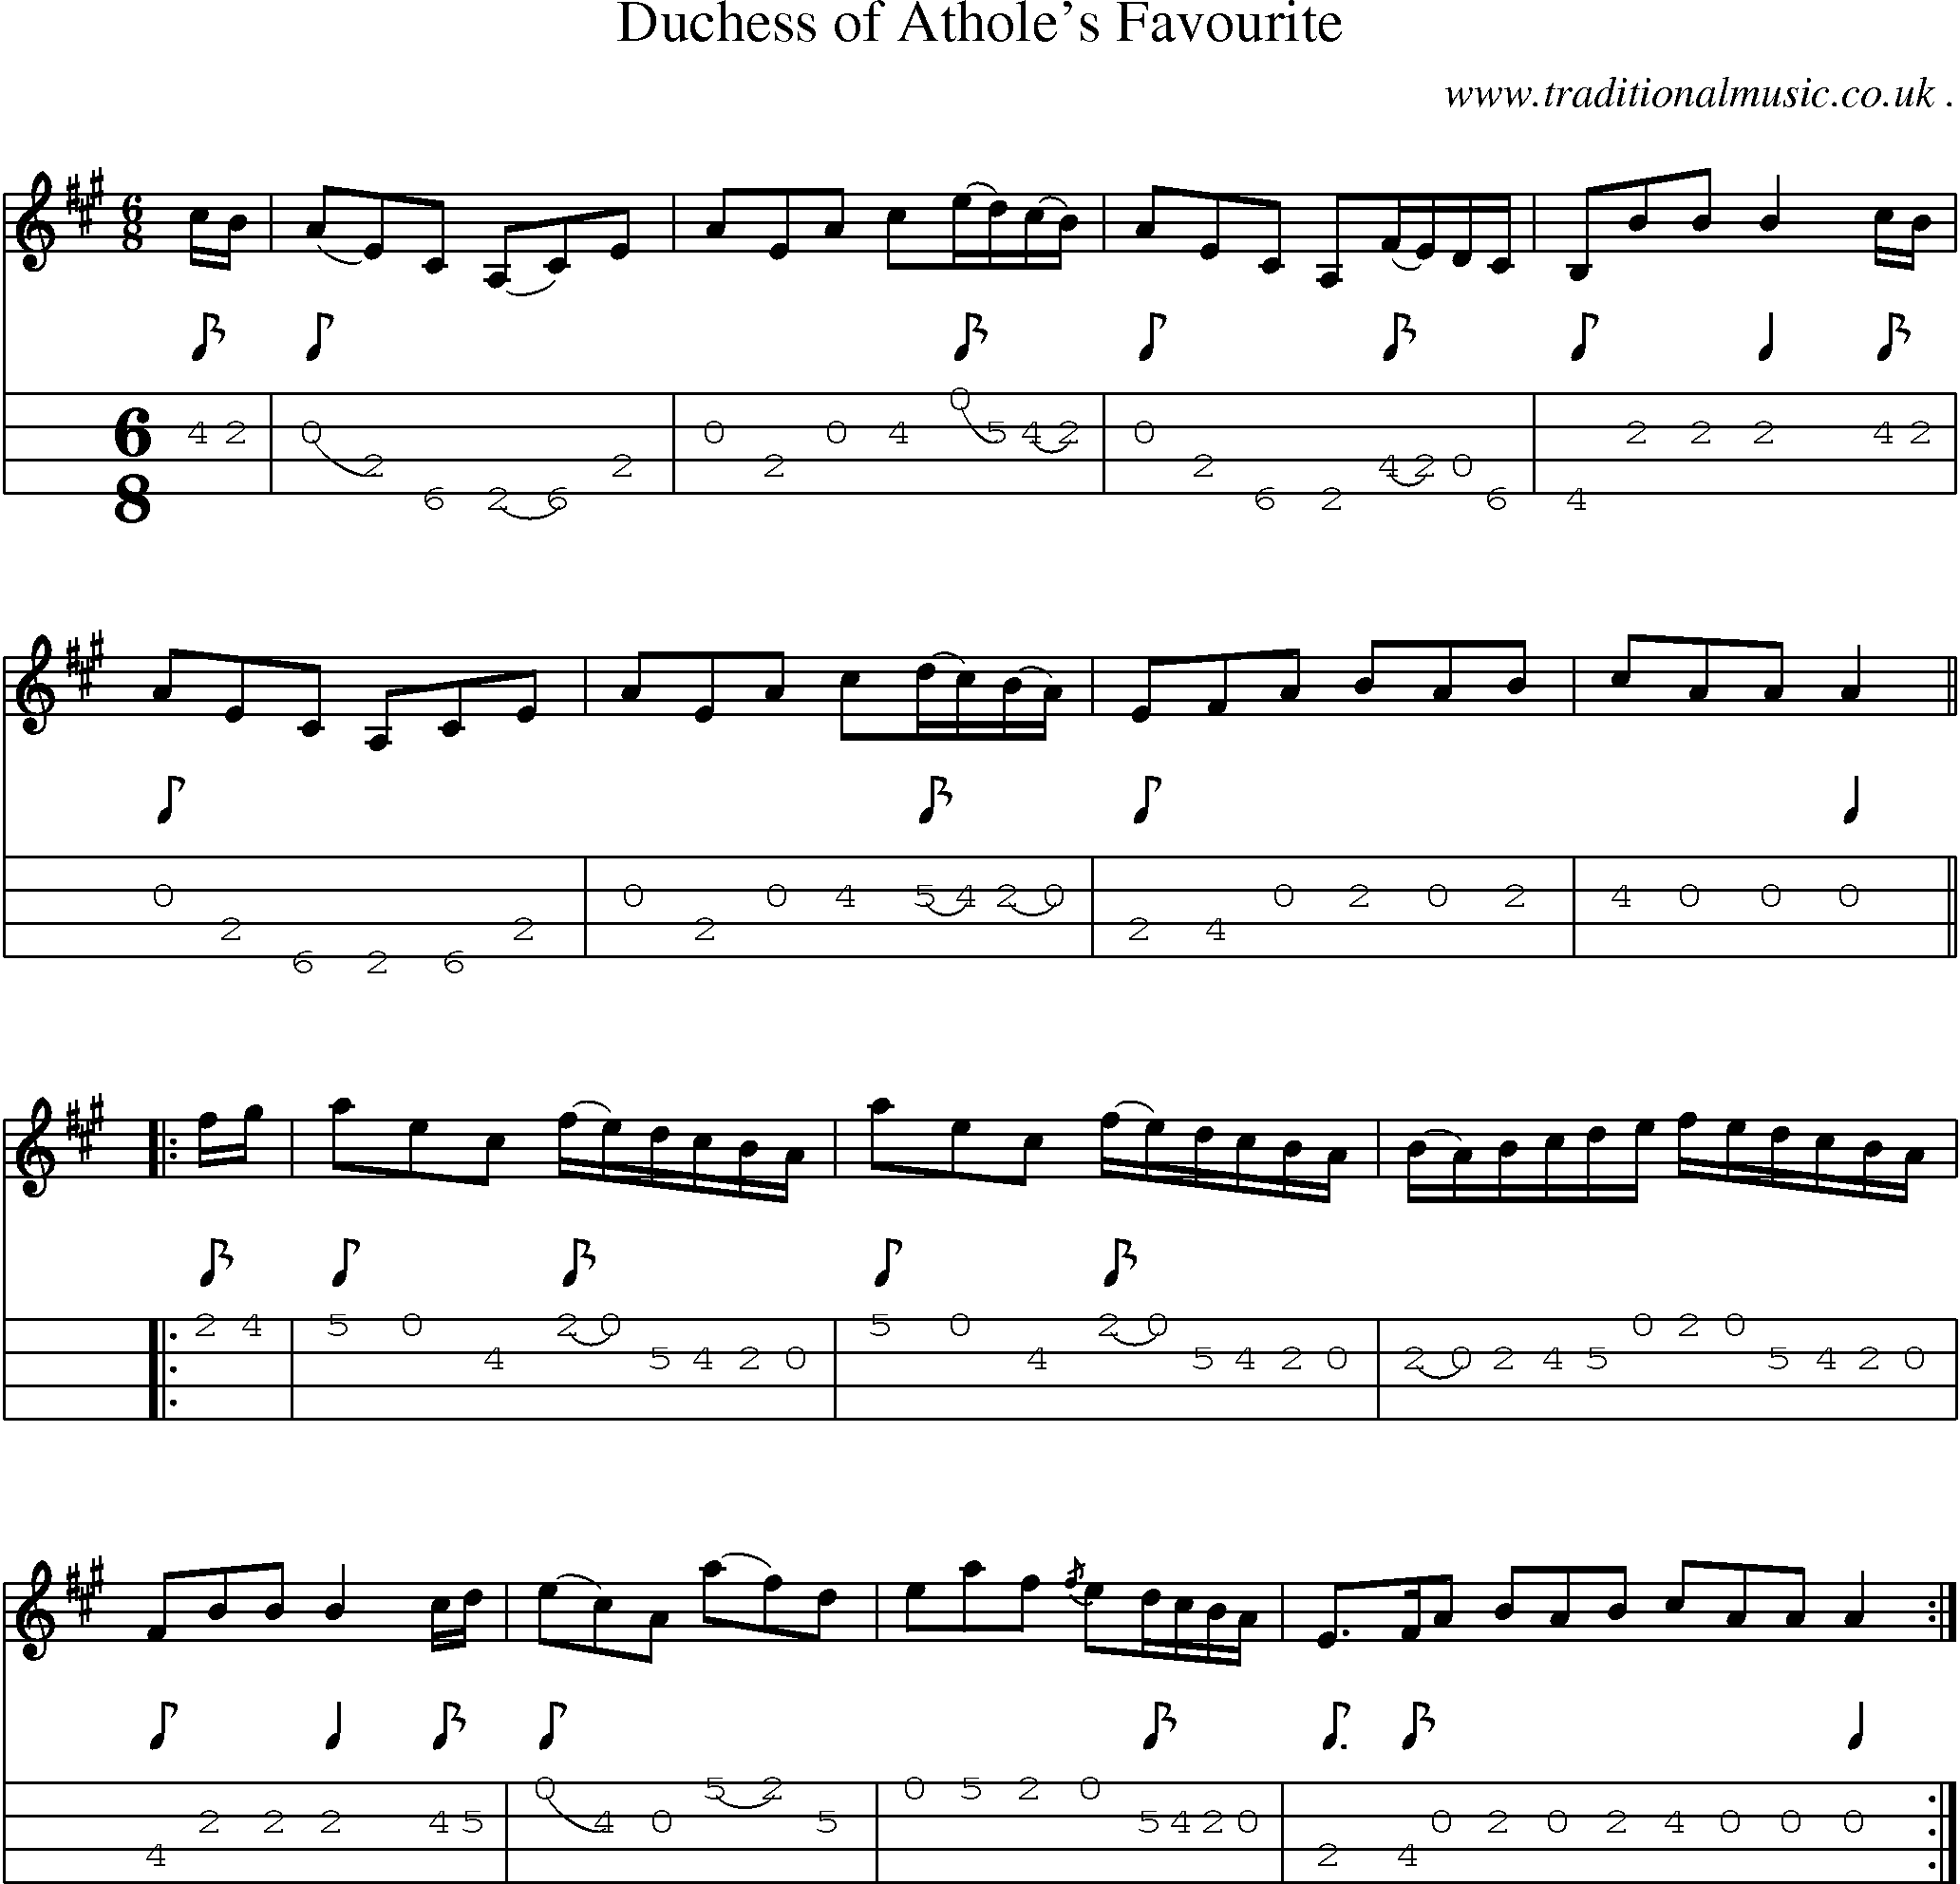 Sheet-music  score, Chords and Mandolin Tabs for Duchess Of Atholes Favourite